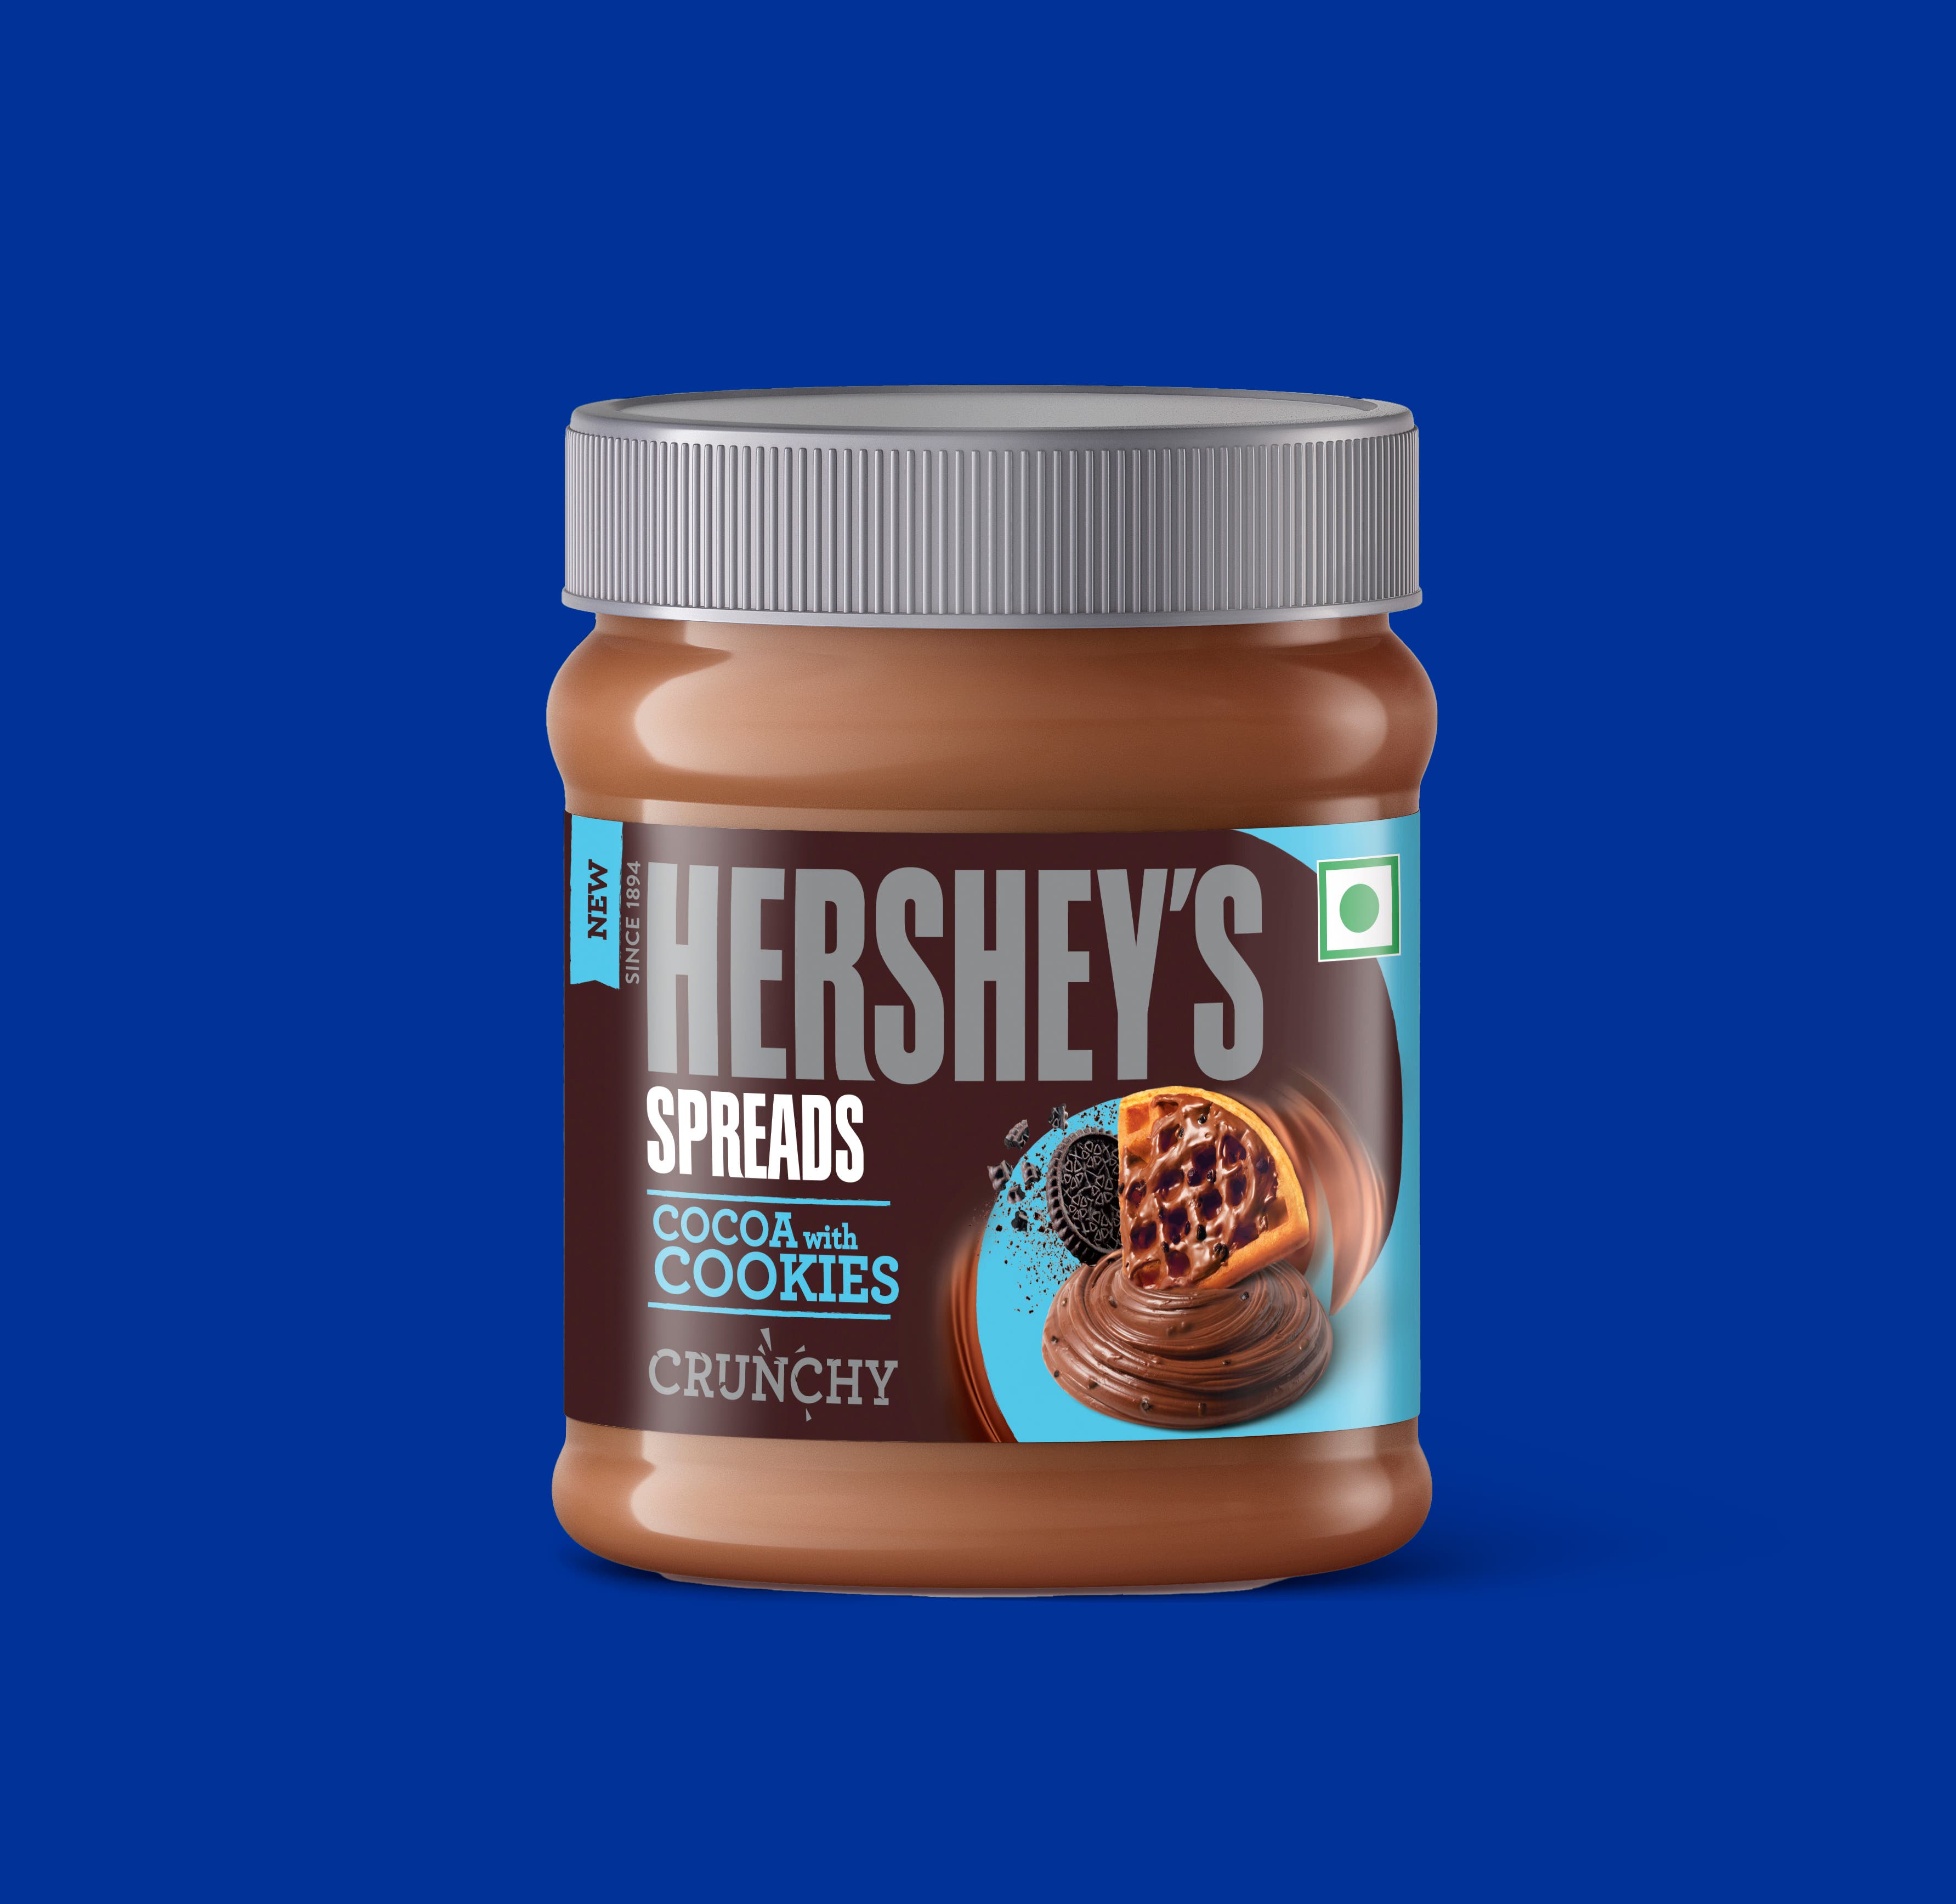 HERSHEY’S SPREADS Cocoa with Cookies